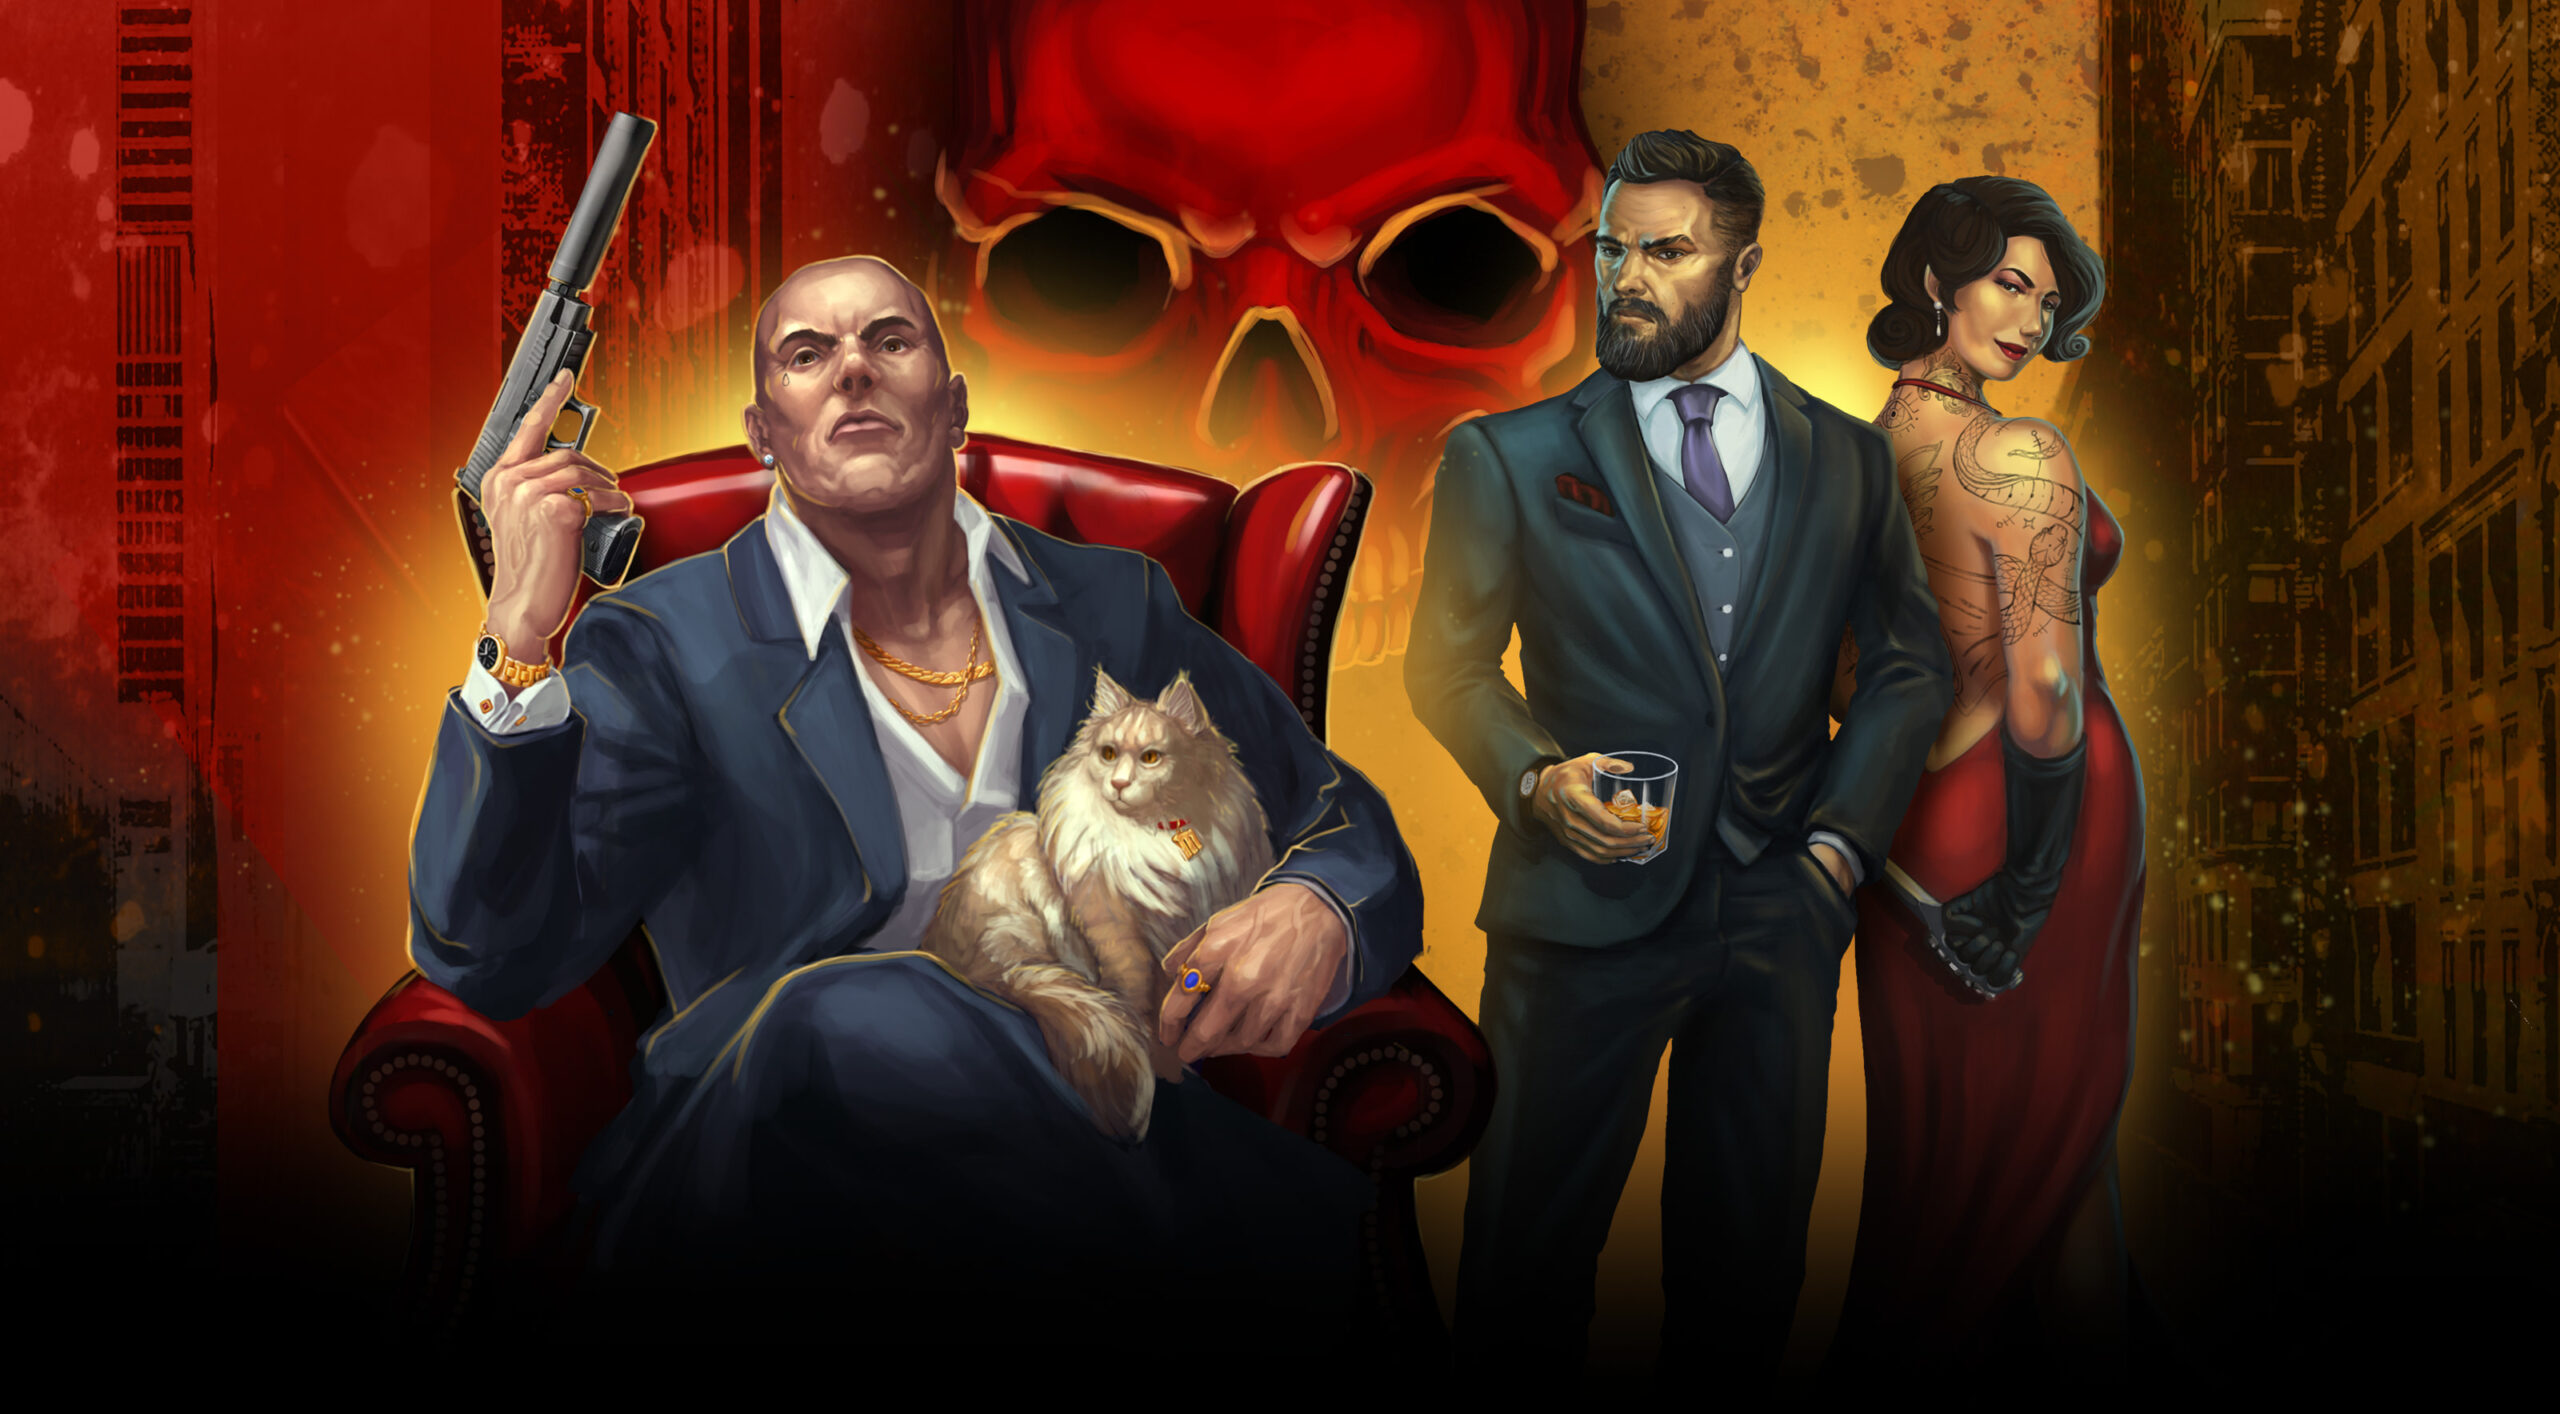 MAFIA Like Game Officially Released For Android, Download & Gameplay